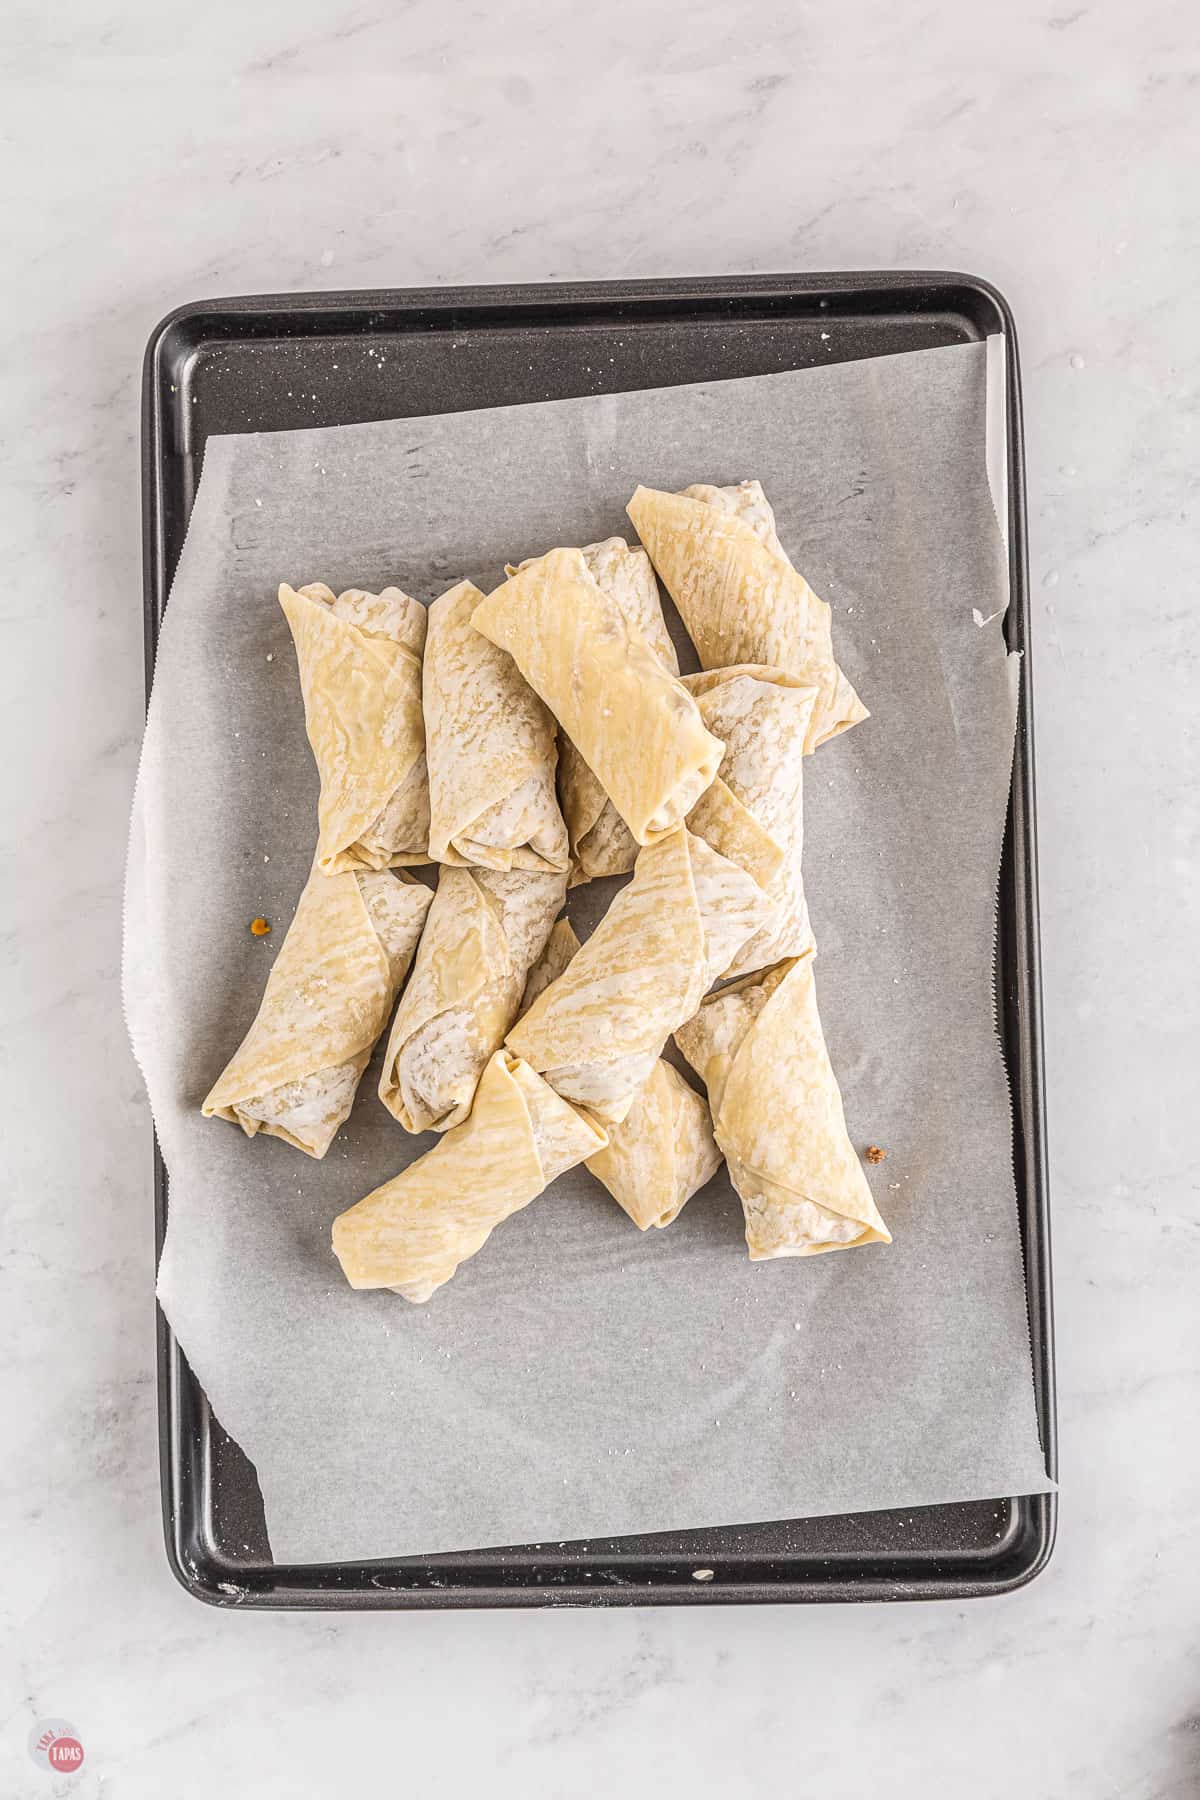 Top view of a tray lined with parchment paper with a heap of uncooked egg rolls on it. 